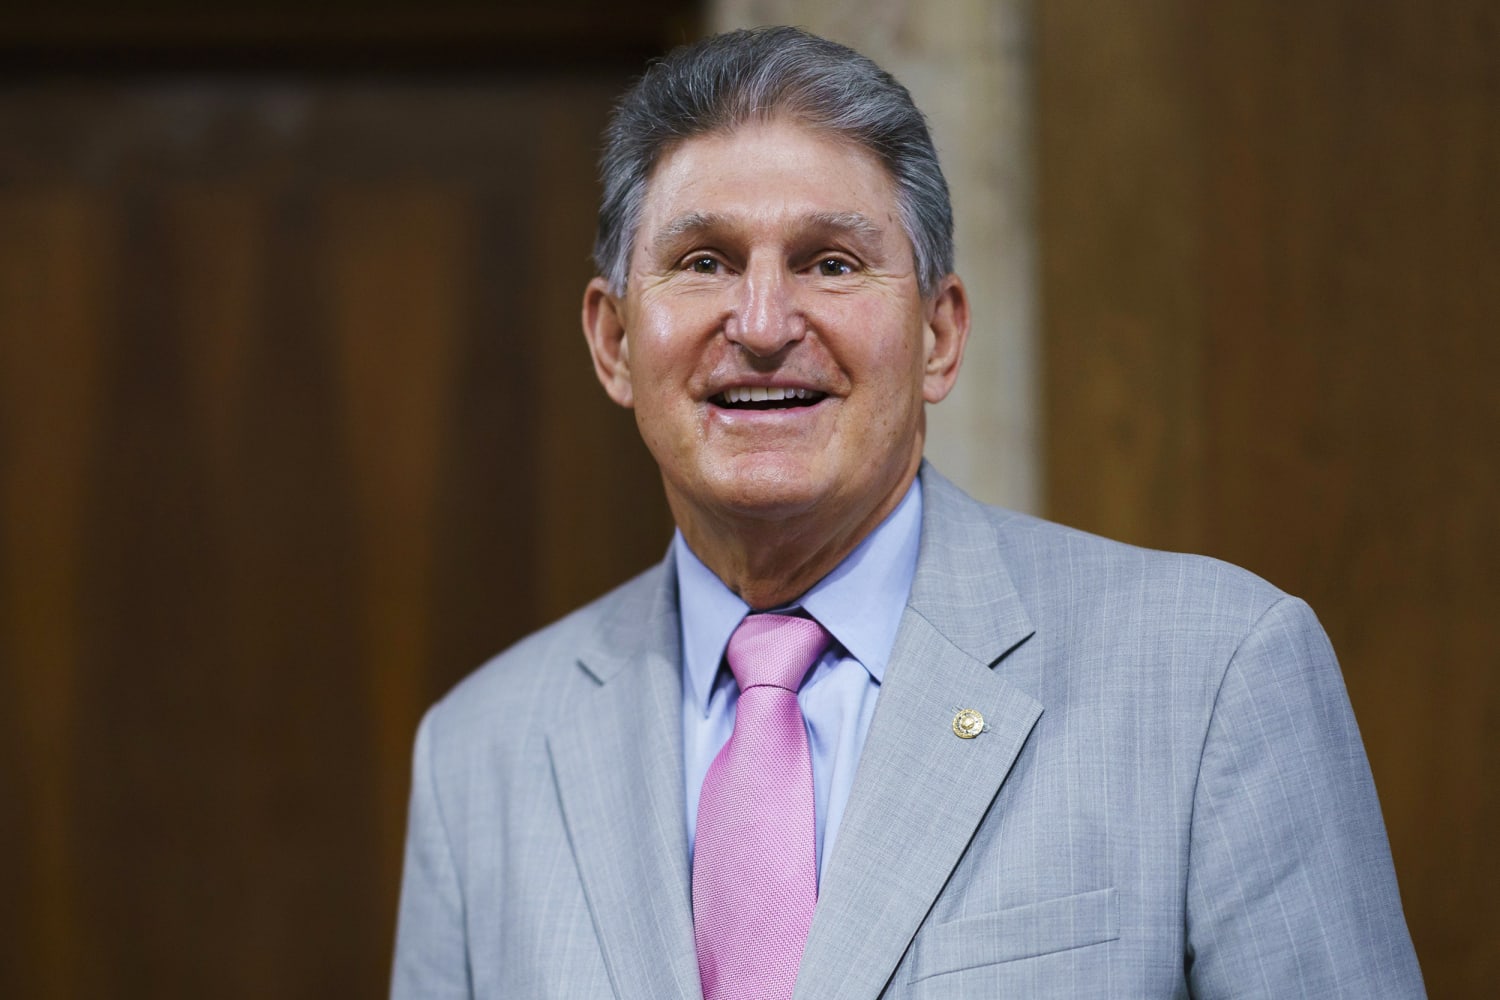 Manchin Opposes D C Statehood Dealing A Blow To Democratic Priority